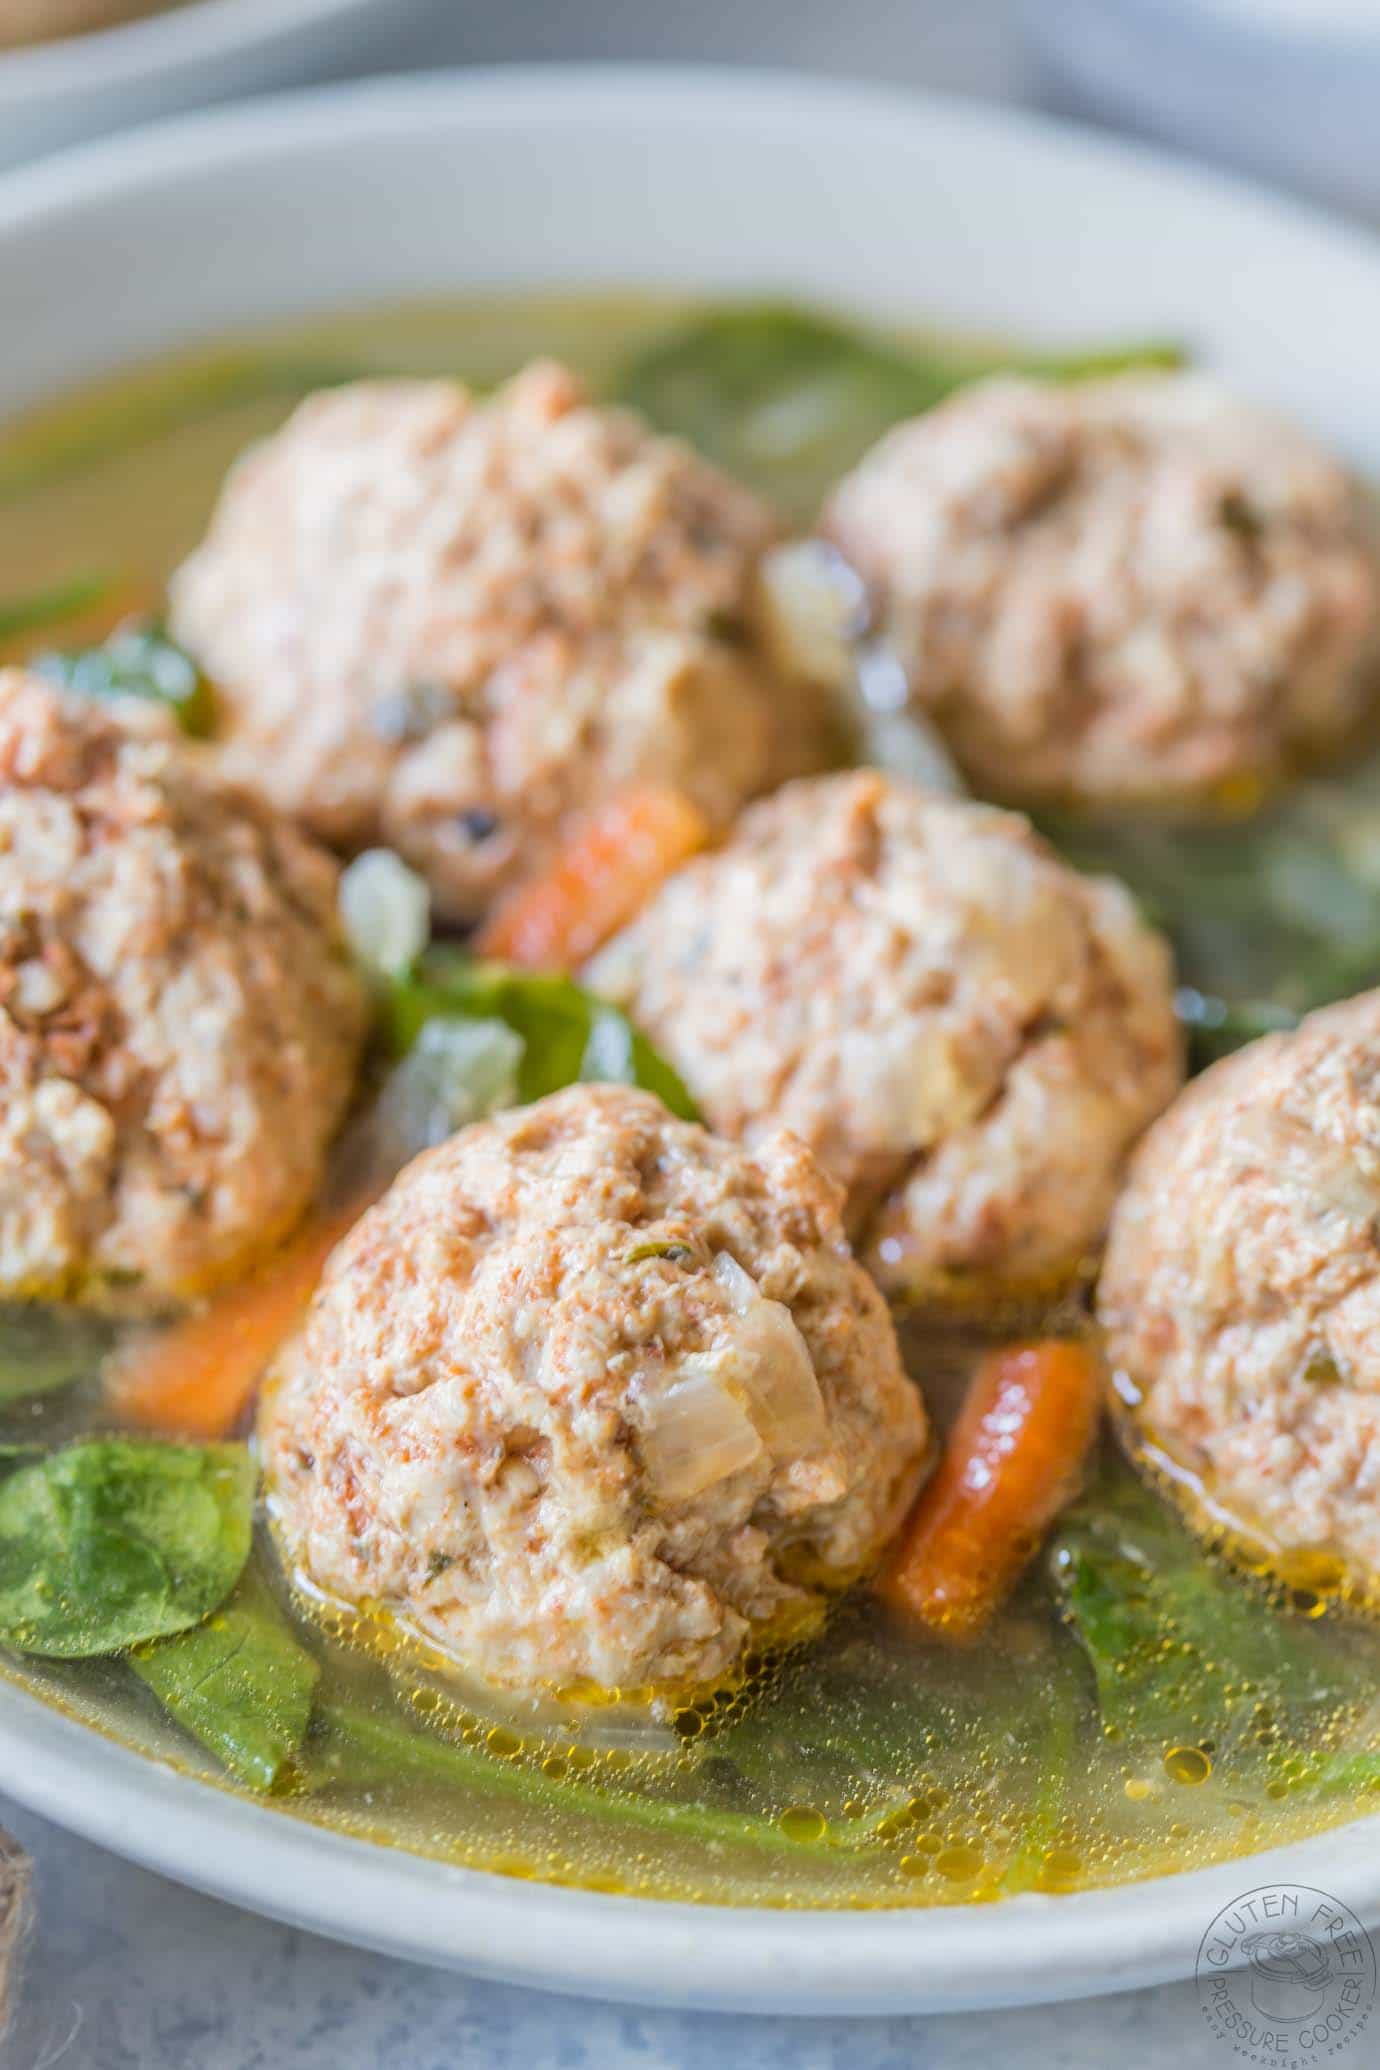 Easy pressure cooker Italian Wedding Soup, this recipe is gluten free, paleo, Whole30, low carb and healthy, and is perfect to make in your Instant Pot or any other electric pressure cooker!